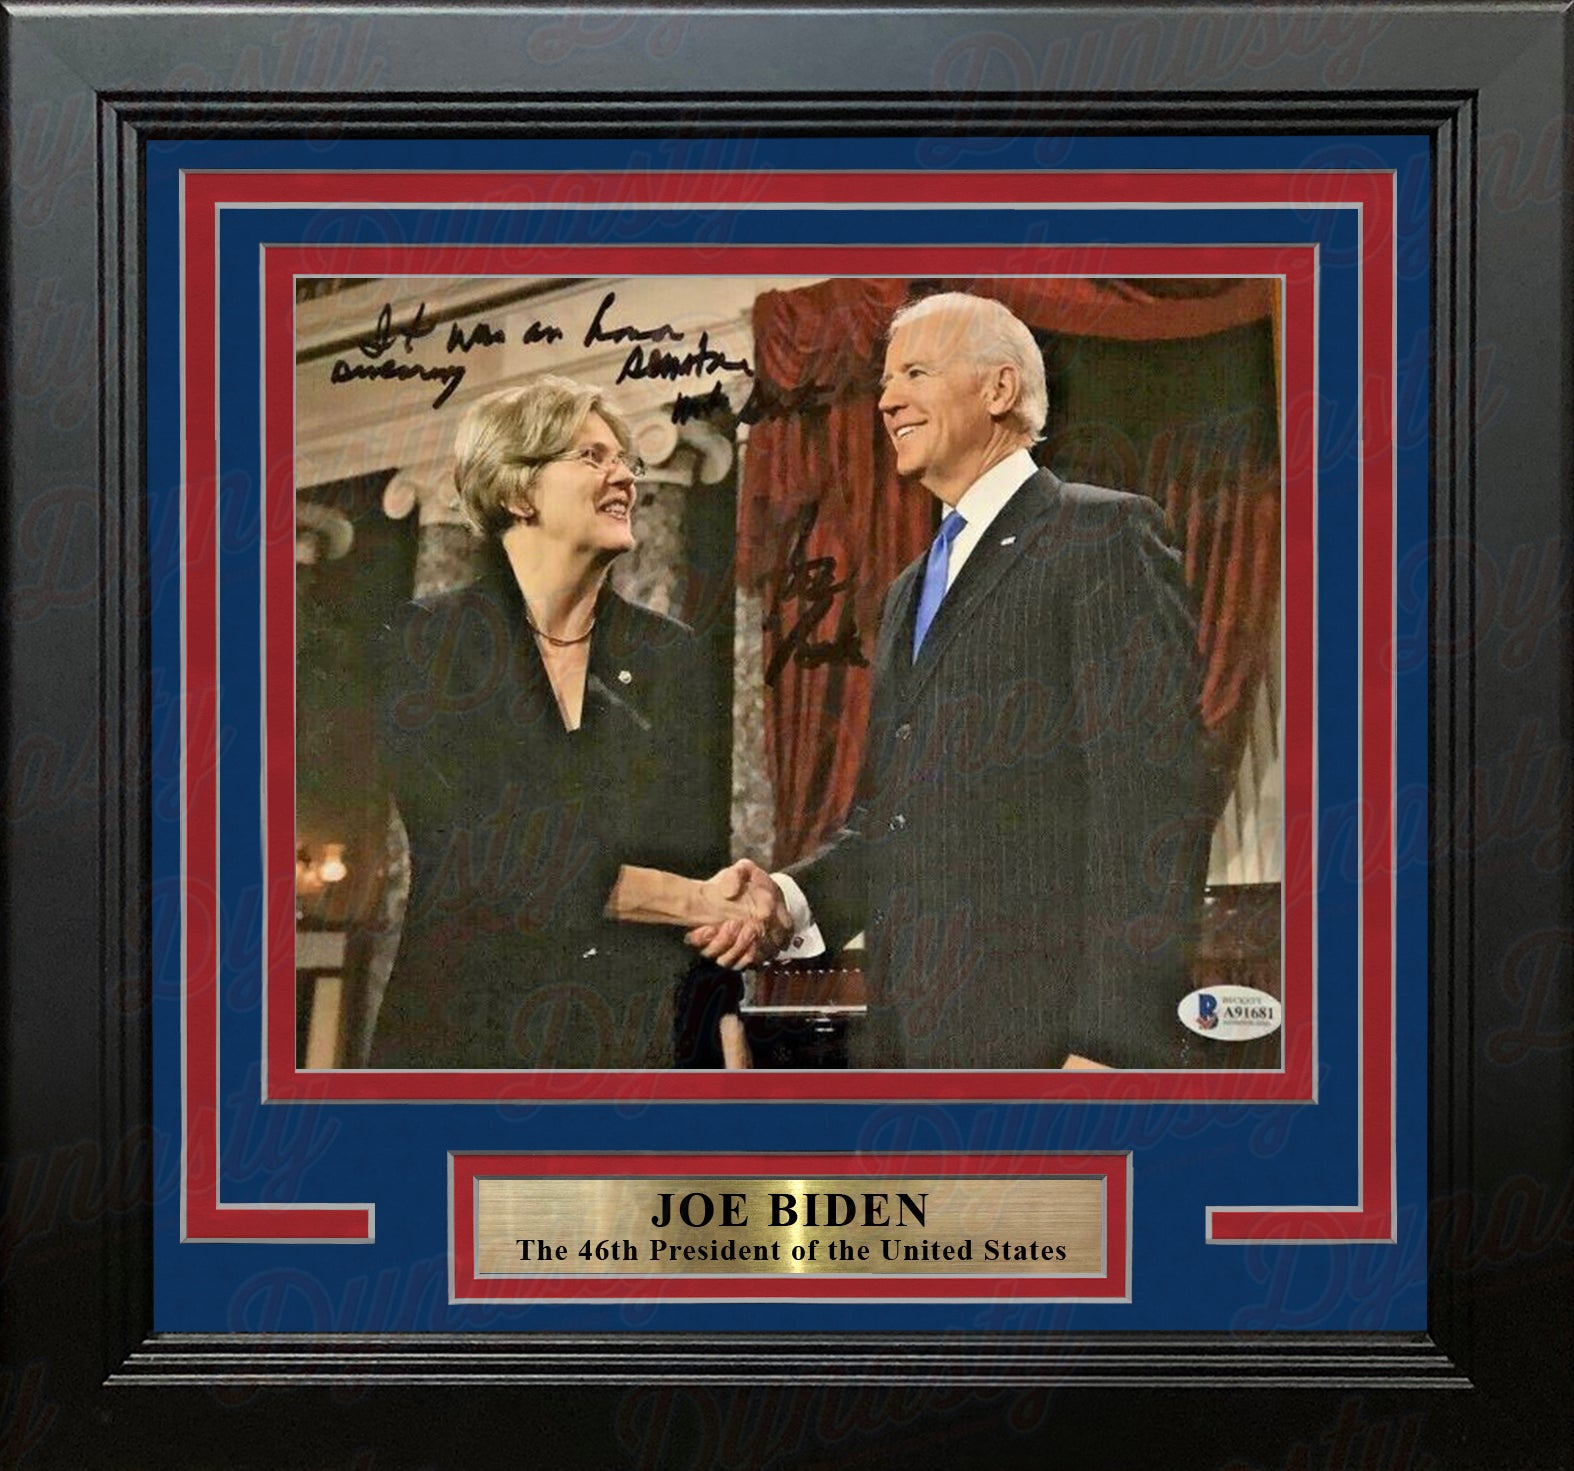 Joe Biden 46th President of the United States Autographed 8" x 10" Framed Photo - Dynasty Sports & Framing 